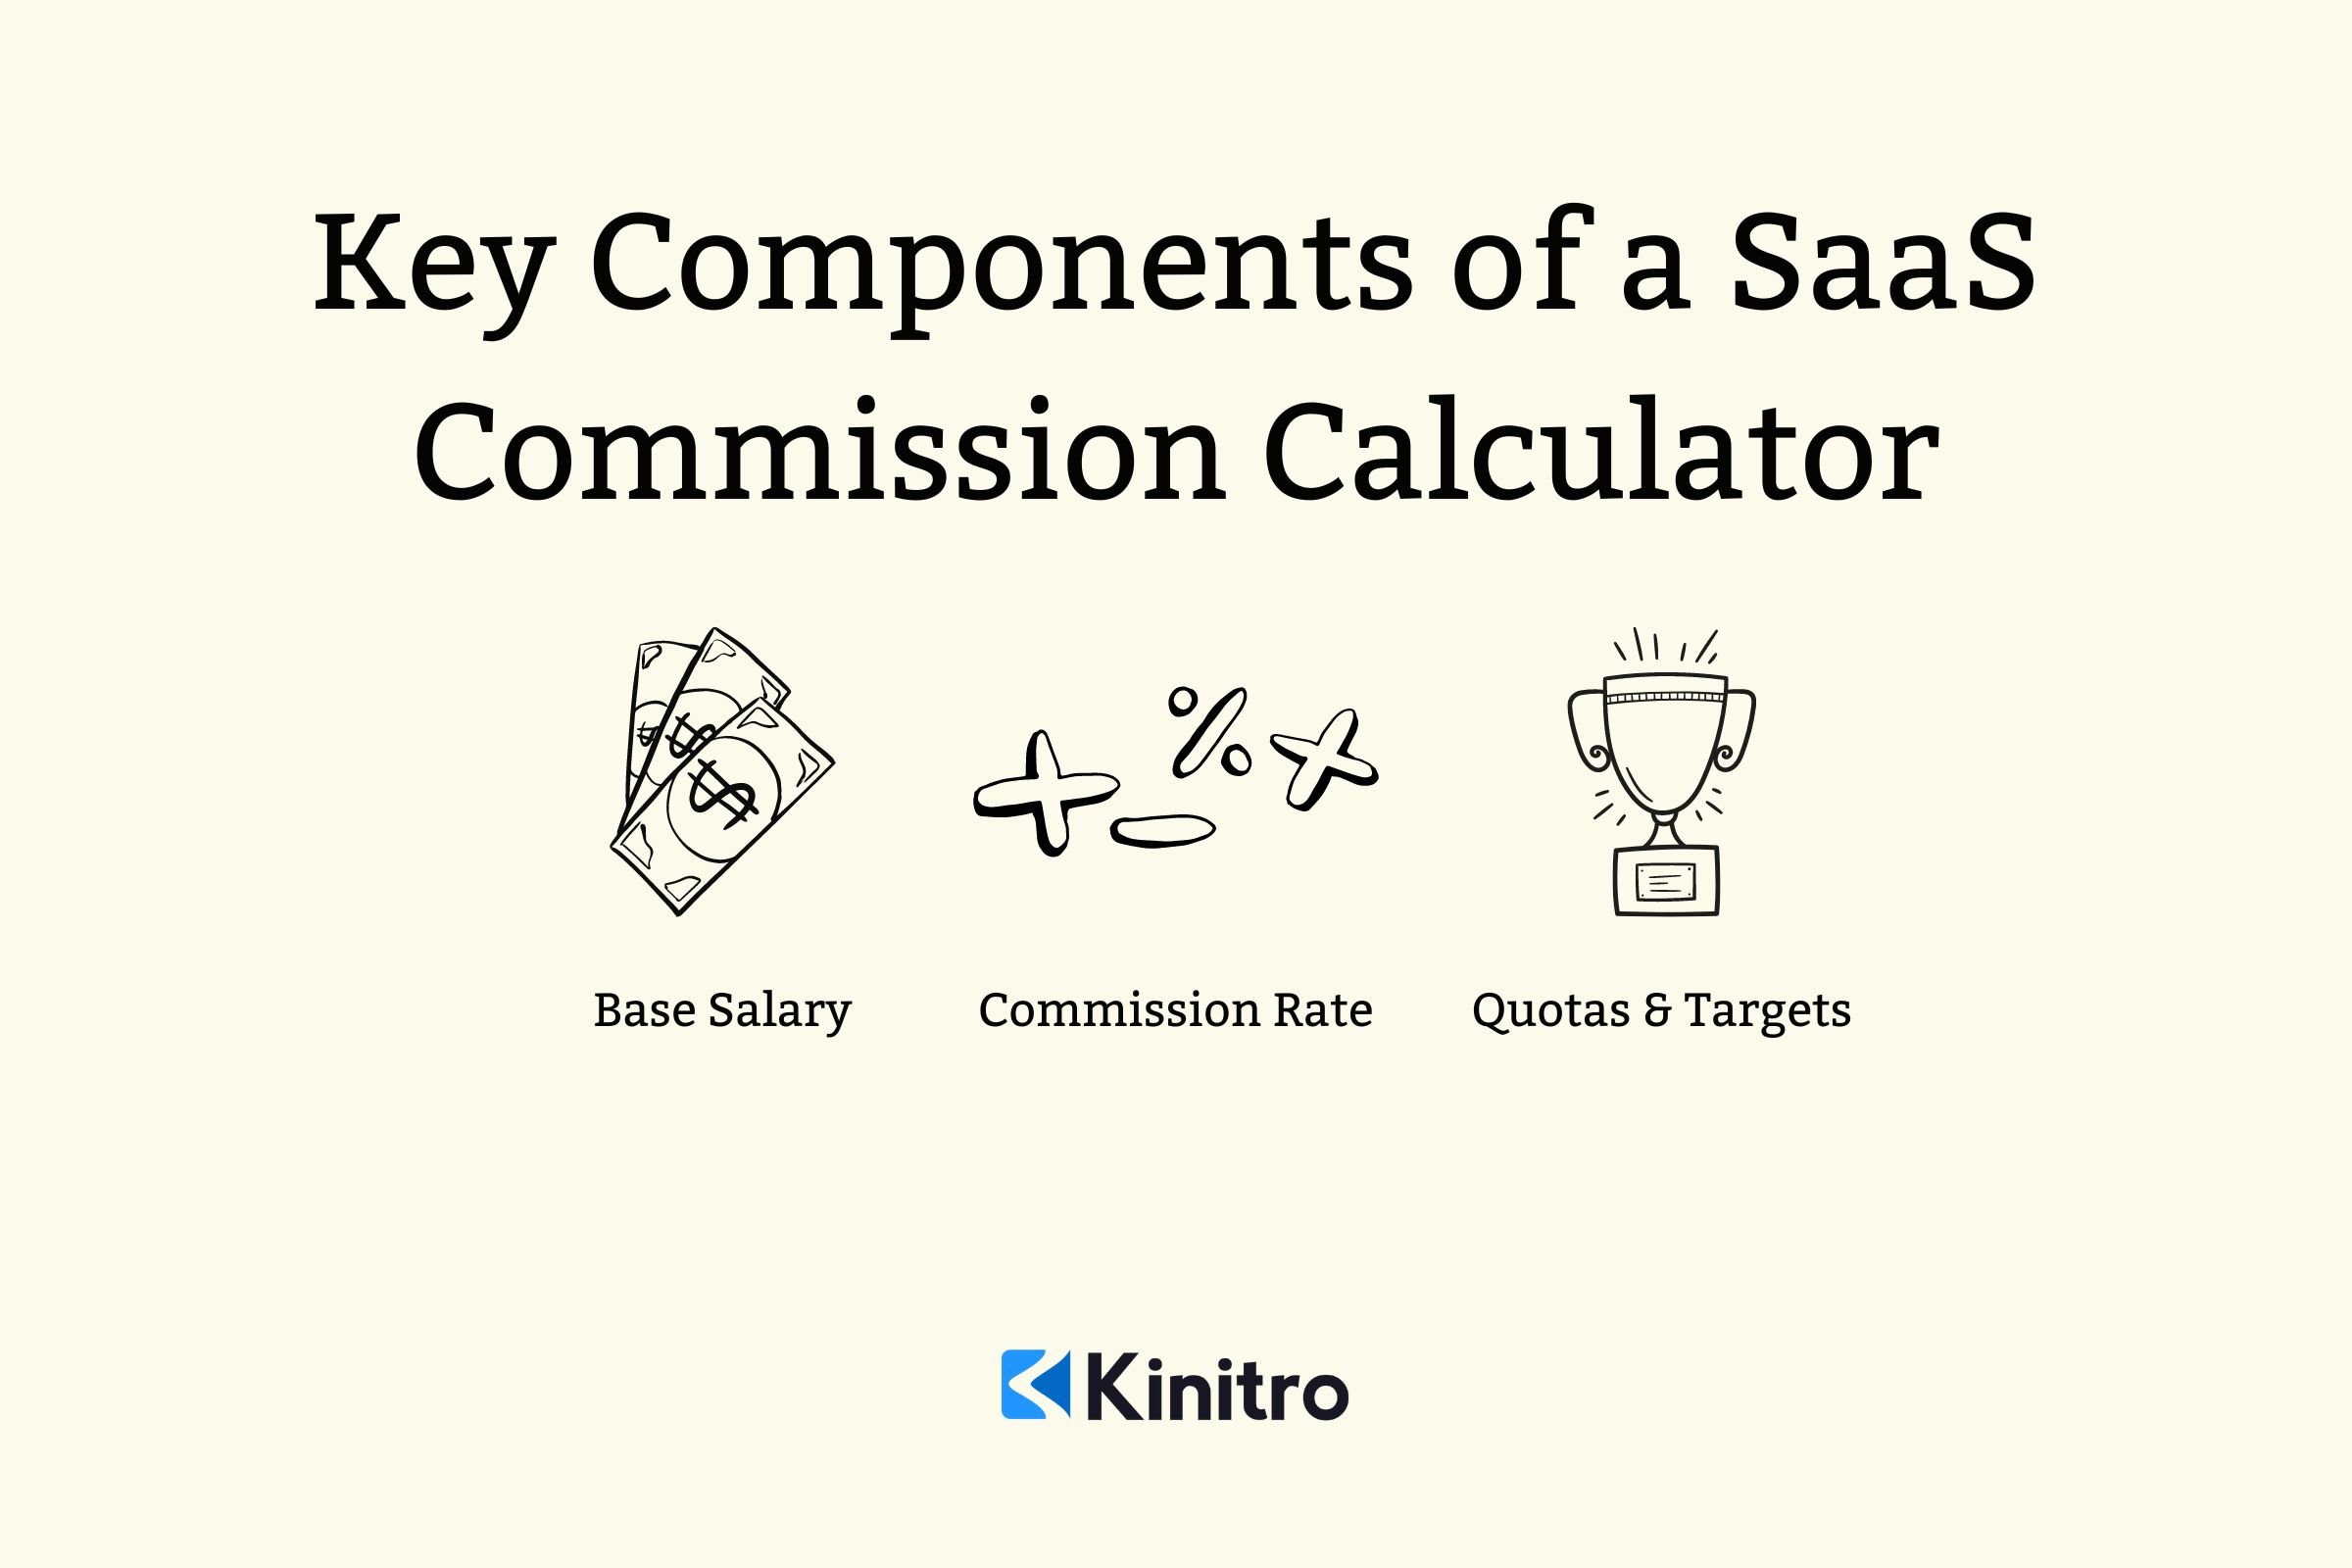 Key Components of a SaaS Commission Calculator